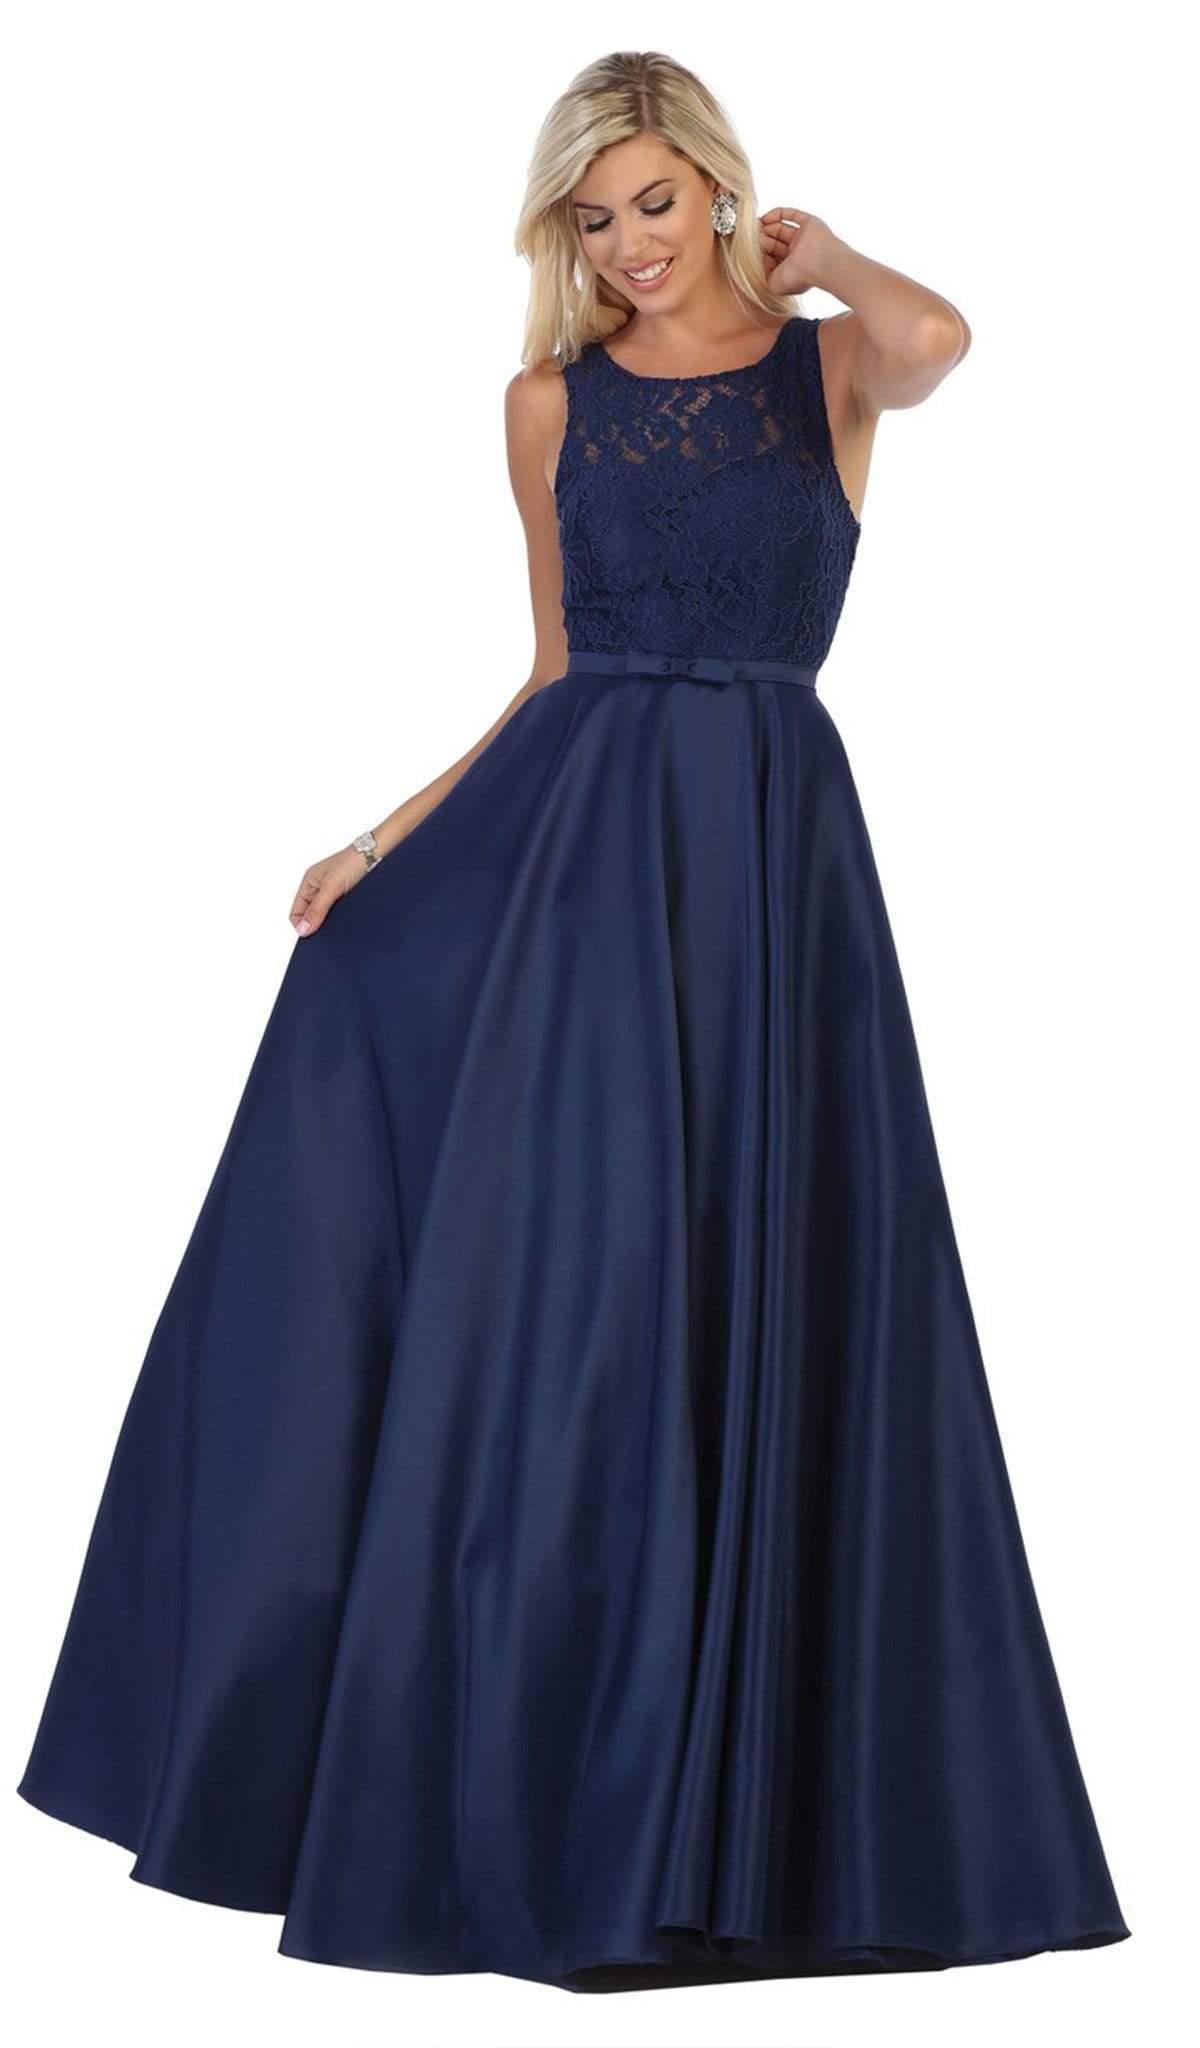 May Queen - MQ1688 Lovely Lace Tank Bow Accent Satin Long Dress Bridesmaid Dresses 4 / Navy